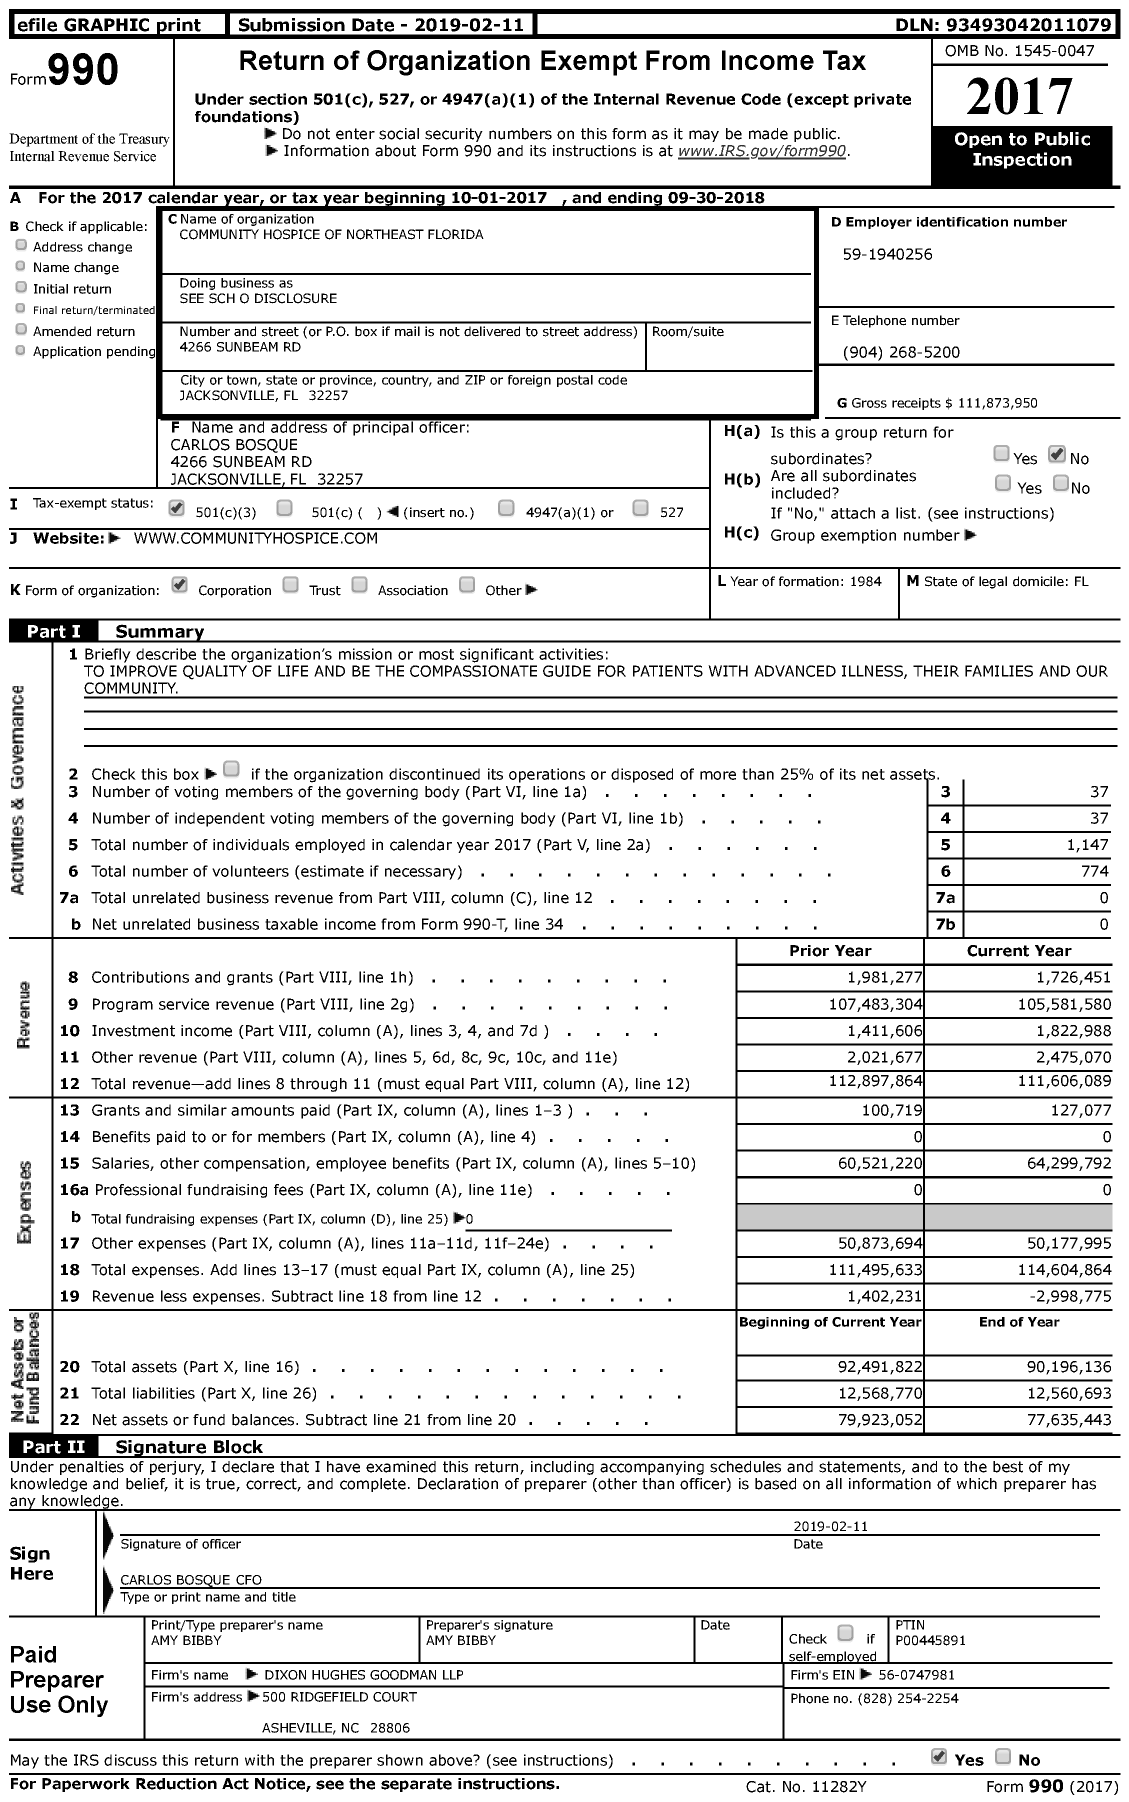 Image of first page of 2017 Form 990 for See SCH of Disclosure